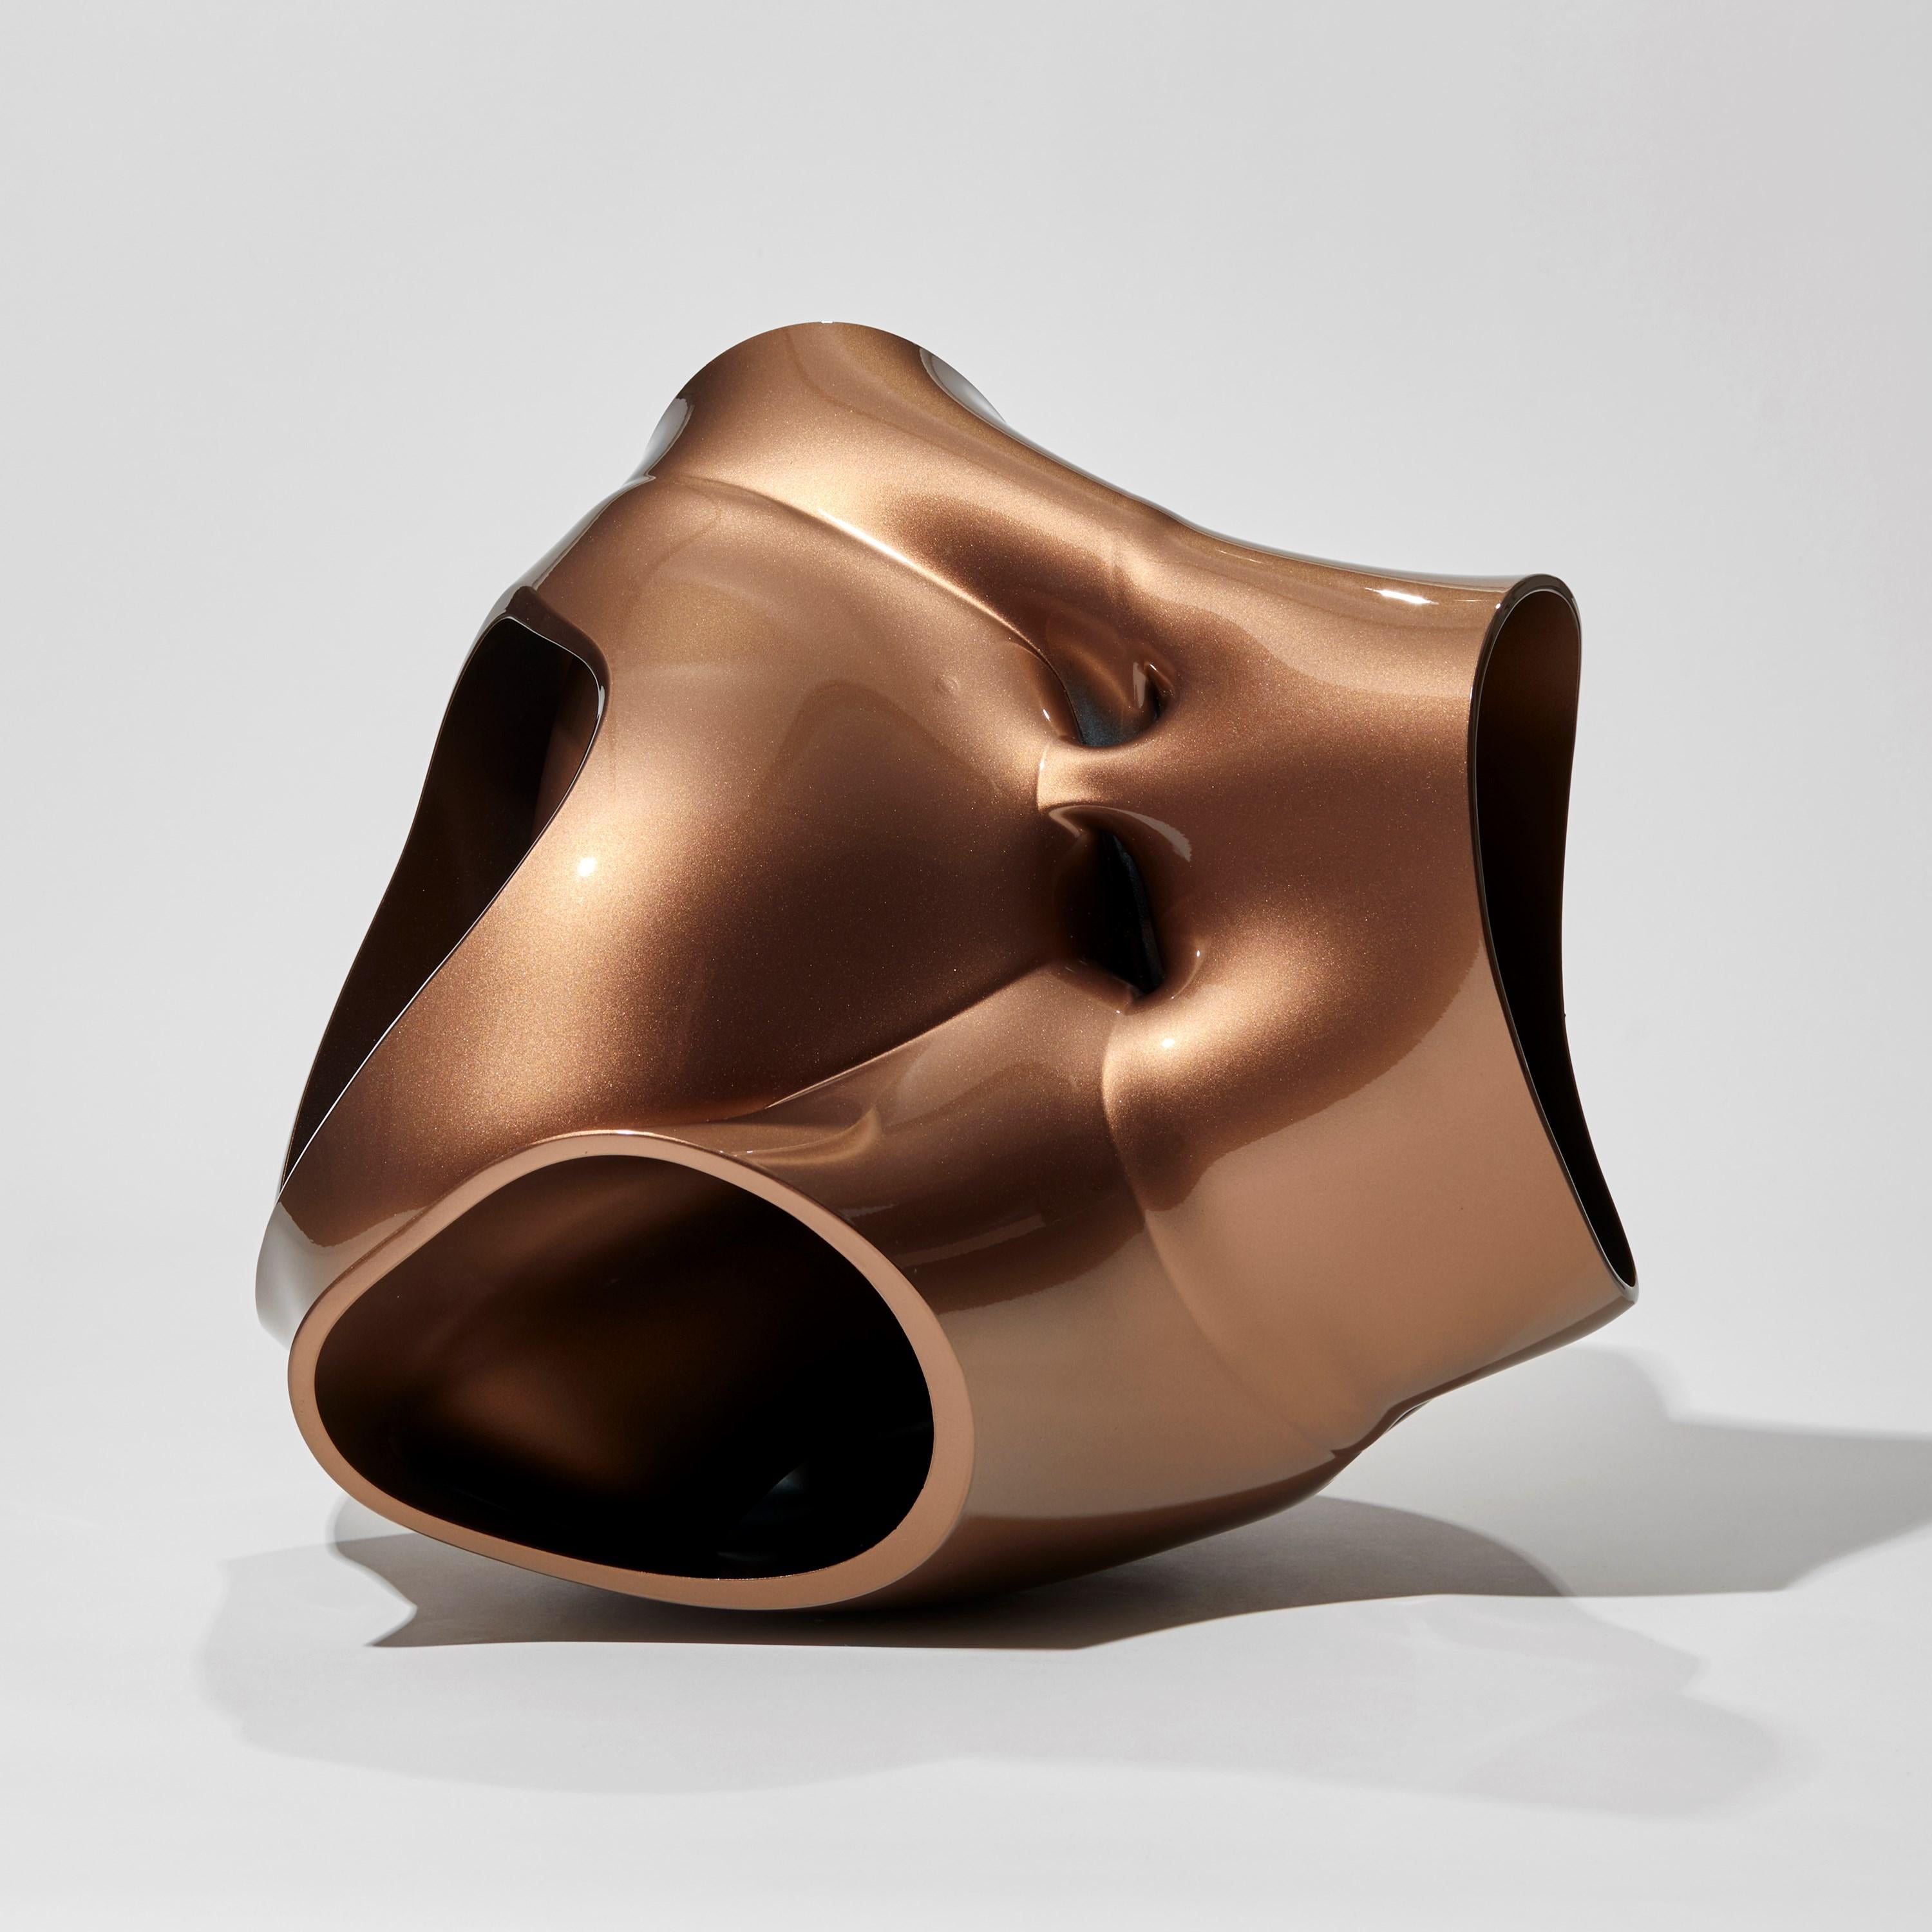 'Heart Flower in Metallic Bronze' is a unique artwork by the Swedish artist and designer, Lena Bergström.

Created for 'Lena 25+', Bergström's 2022 solo exhibition celebrating the 25 years and more for which she has been designing glass for the